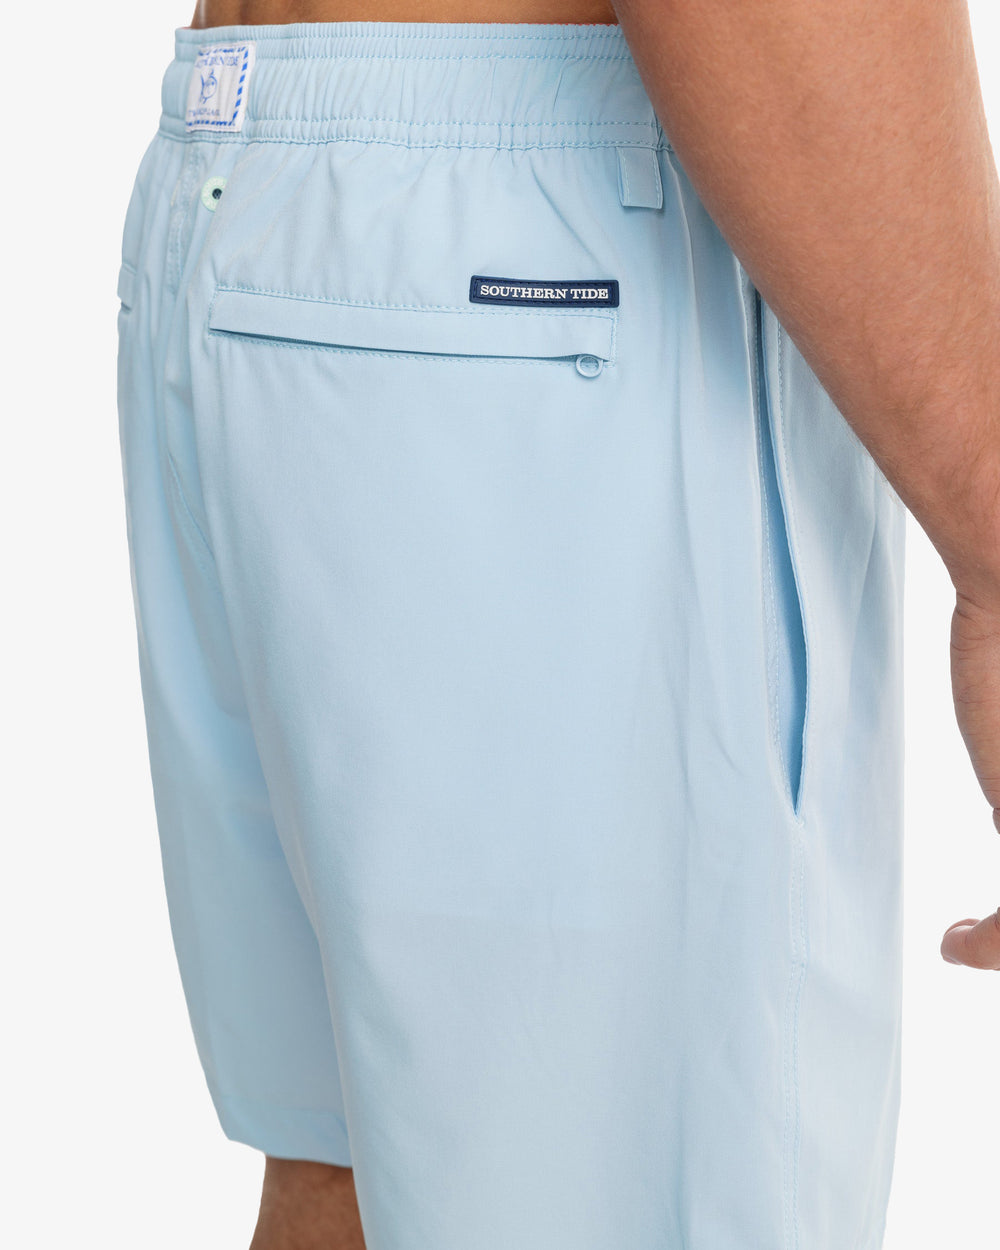 The model detail view of the Men's Solid Swim Trunk by Southern Tide - Aquamarine